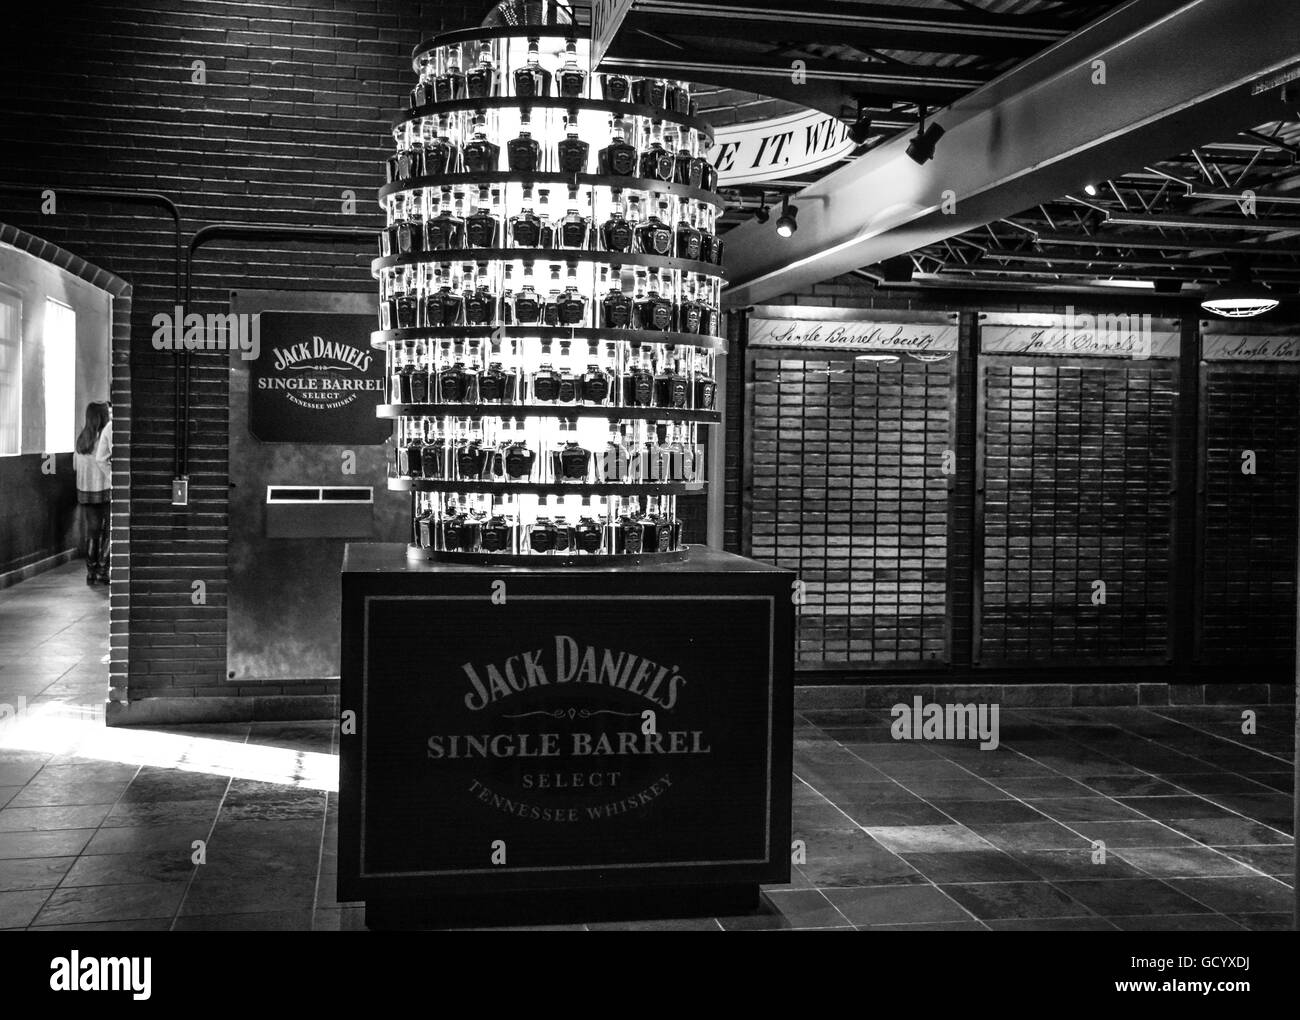 Bottles of Jack Daniel's Single Barrel Select Whiskey in tree shaped display during the tour of the Distillery in Lynchburg, TN Stock Photo